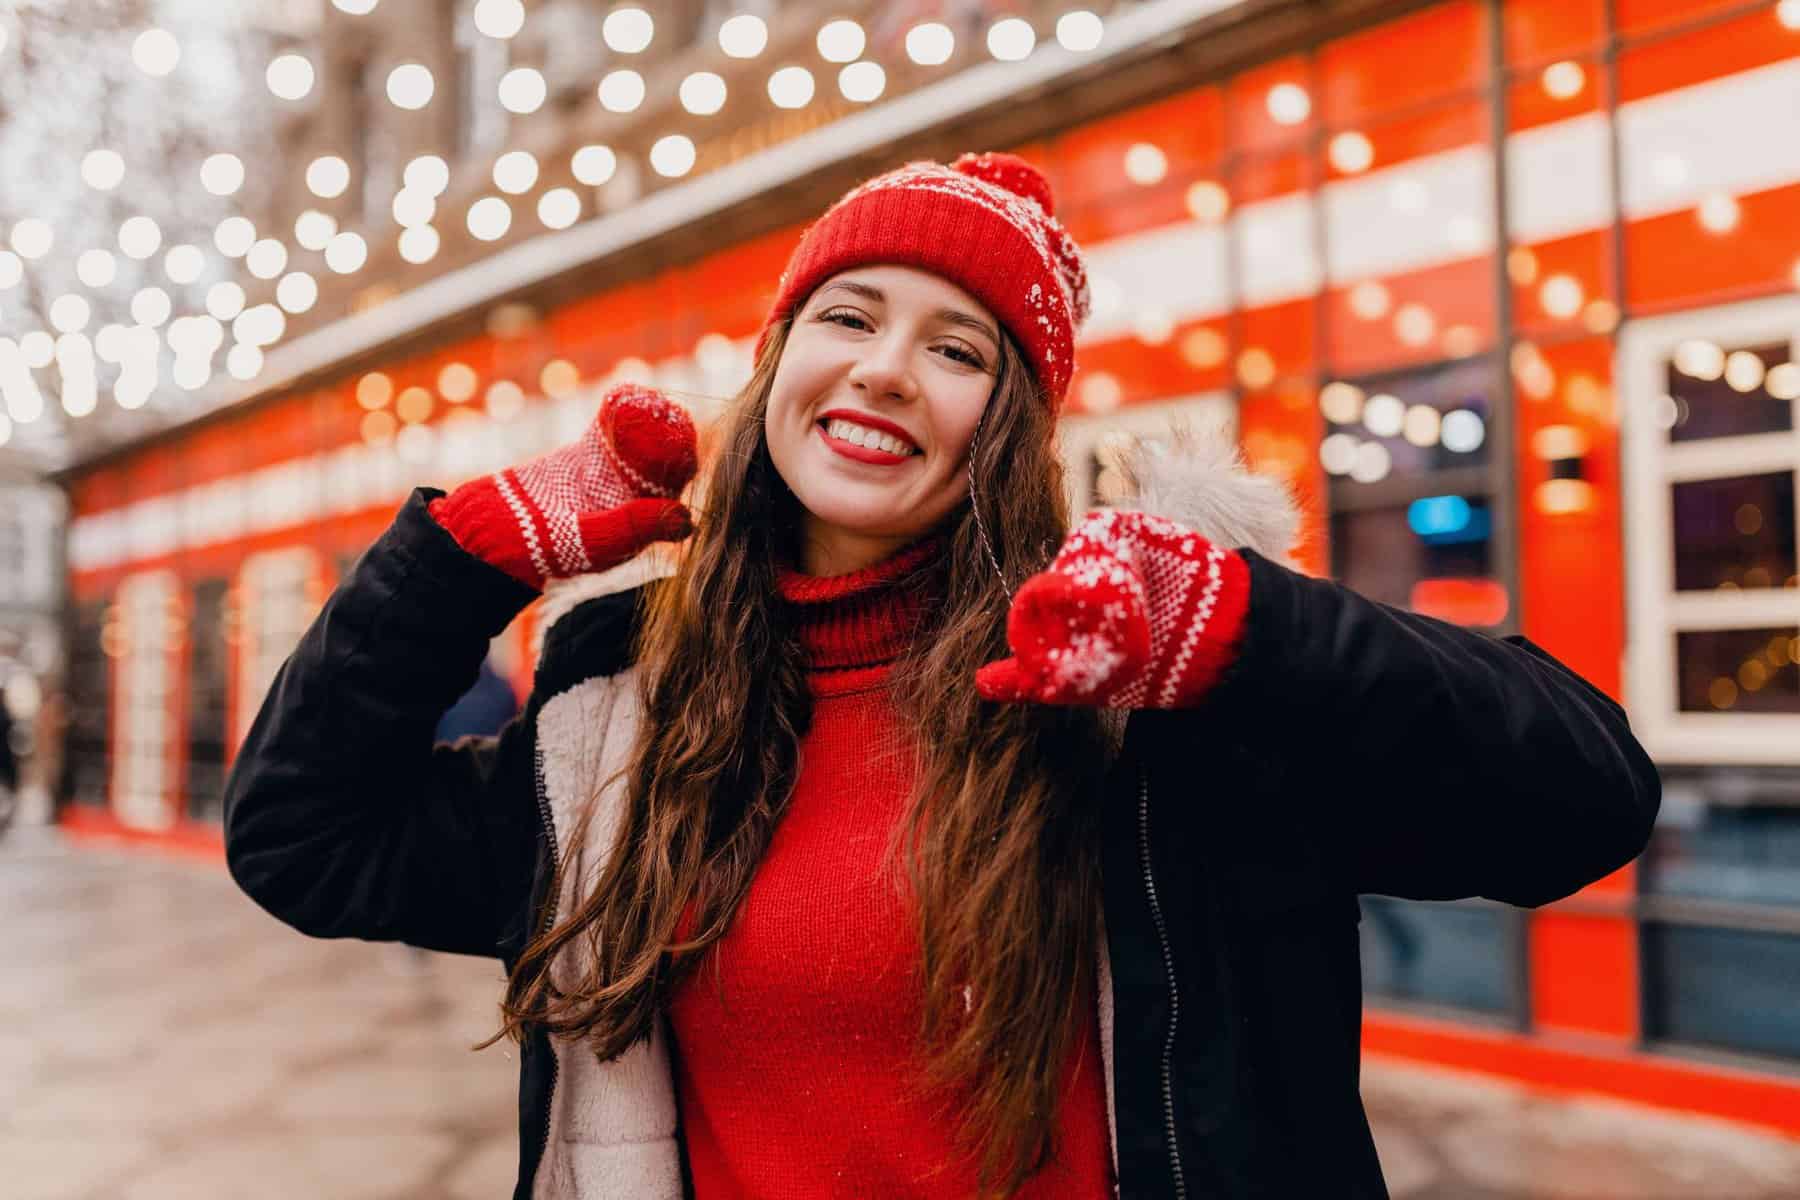 Winter Warmth: How to Style Red Outfits in Cold Weather